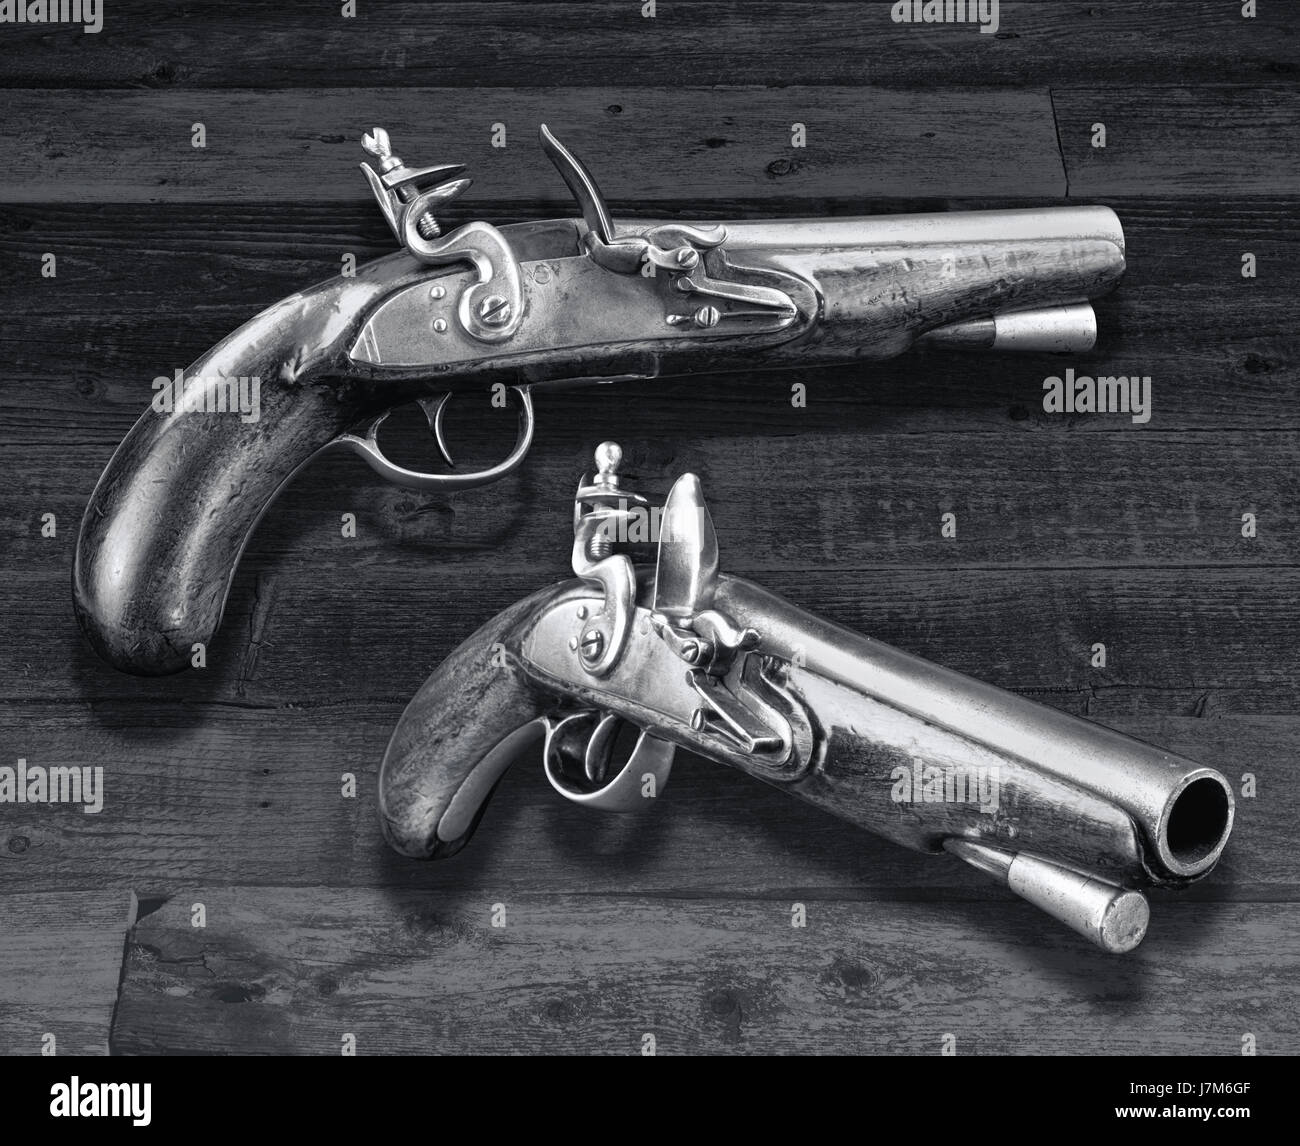 Antique English flintlock pistols made in the late 1700's in black and white. Stock Photo